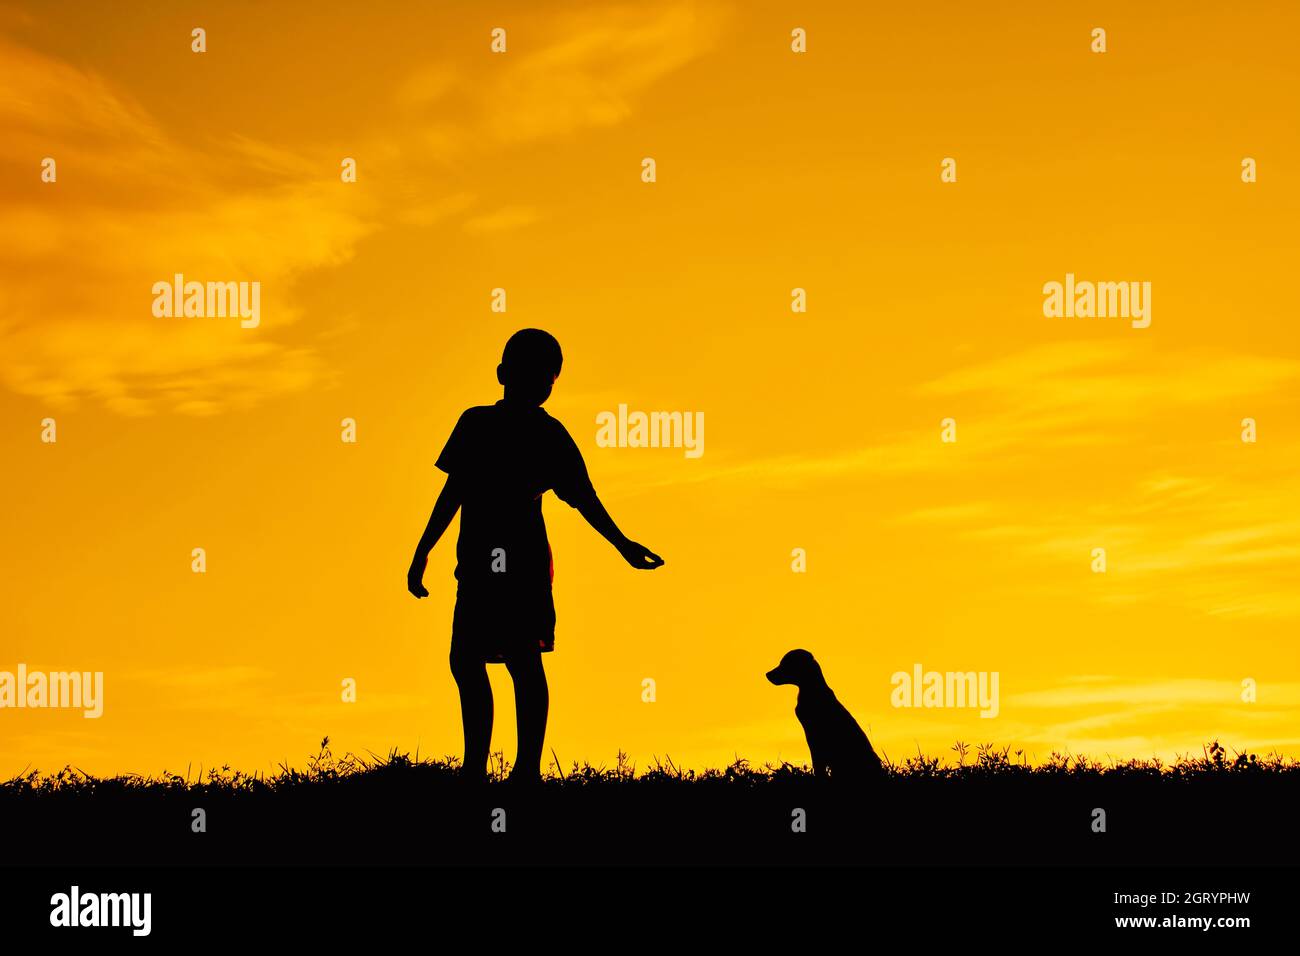 Silhouette Boy With Dog On Field Against Sky During Sunset Stock Photo